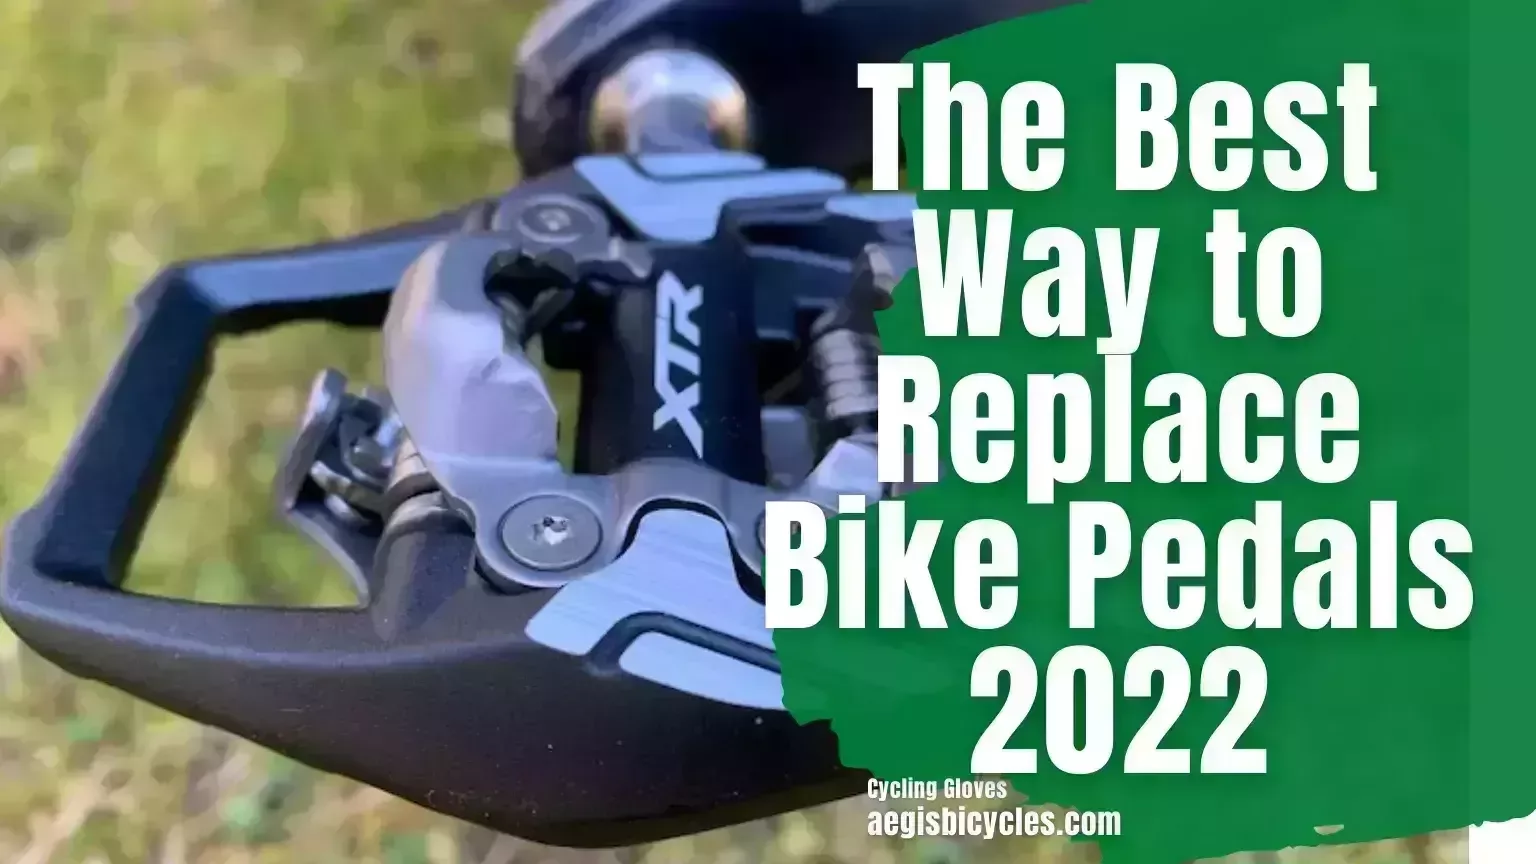 Changing bike pedals The Best Way to Replace Bike Pedals